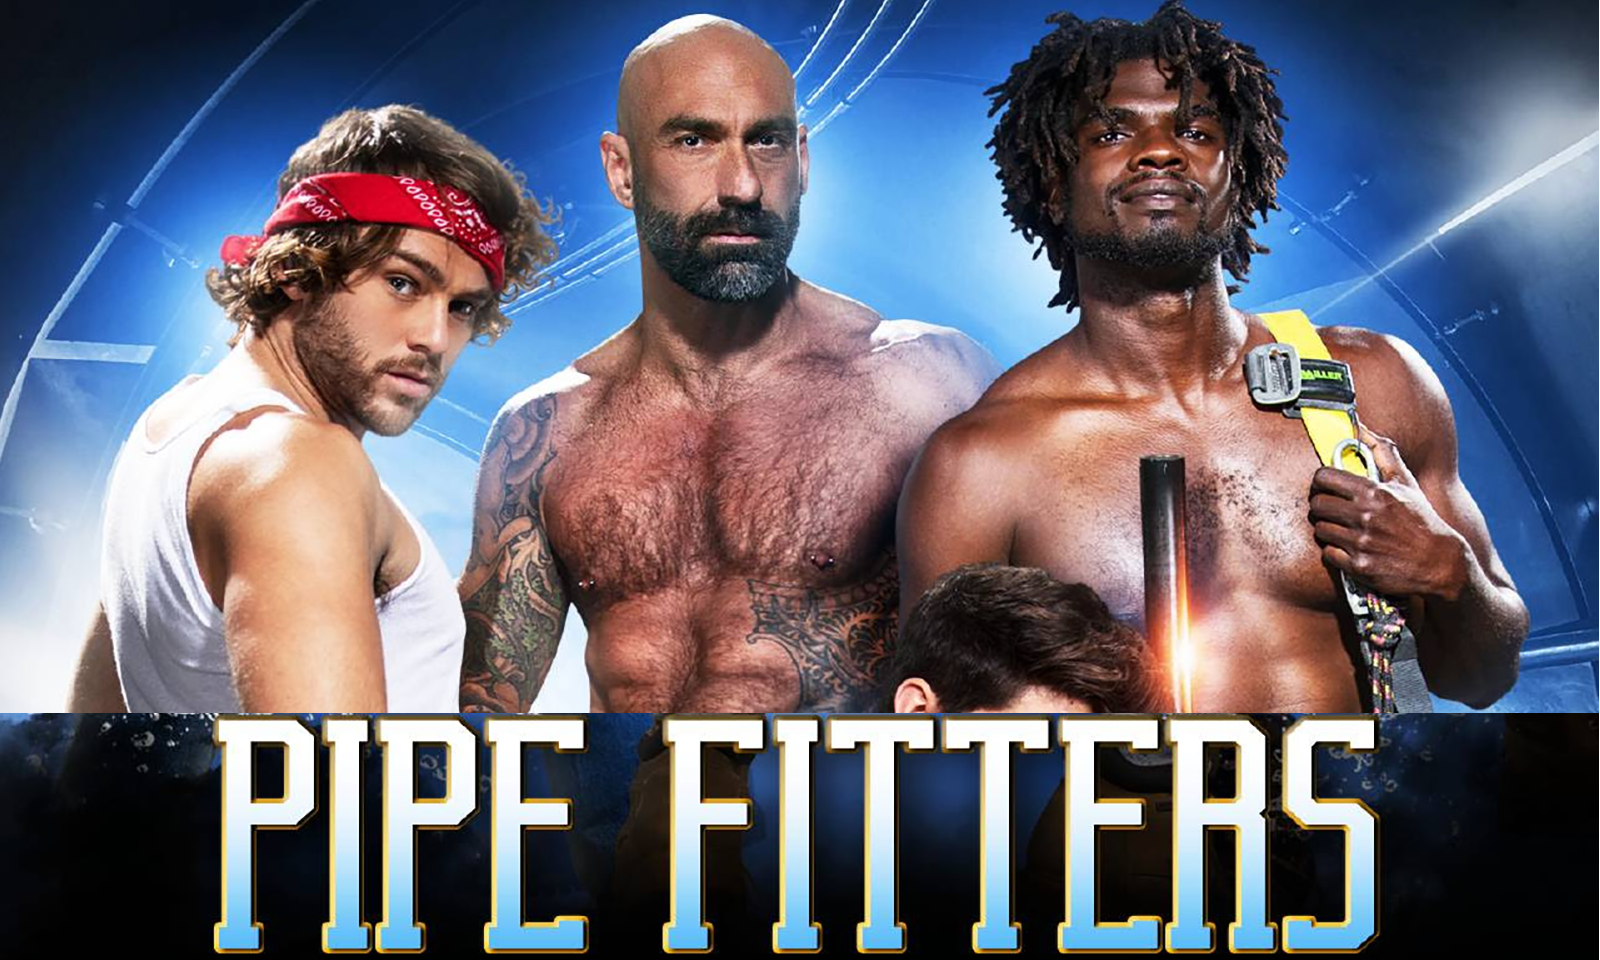 Raging Stallion Releases ‘Pipe Fitters’ on DVD & VOD